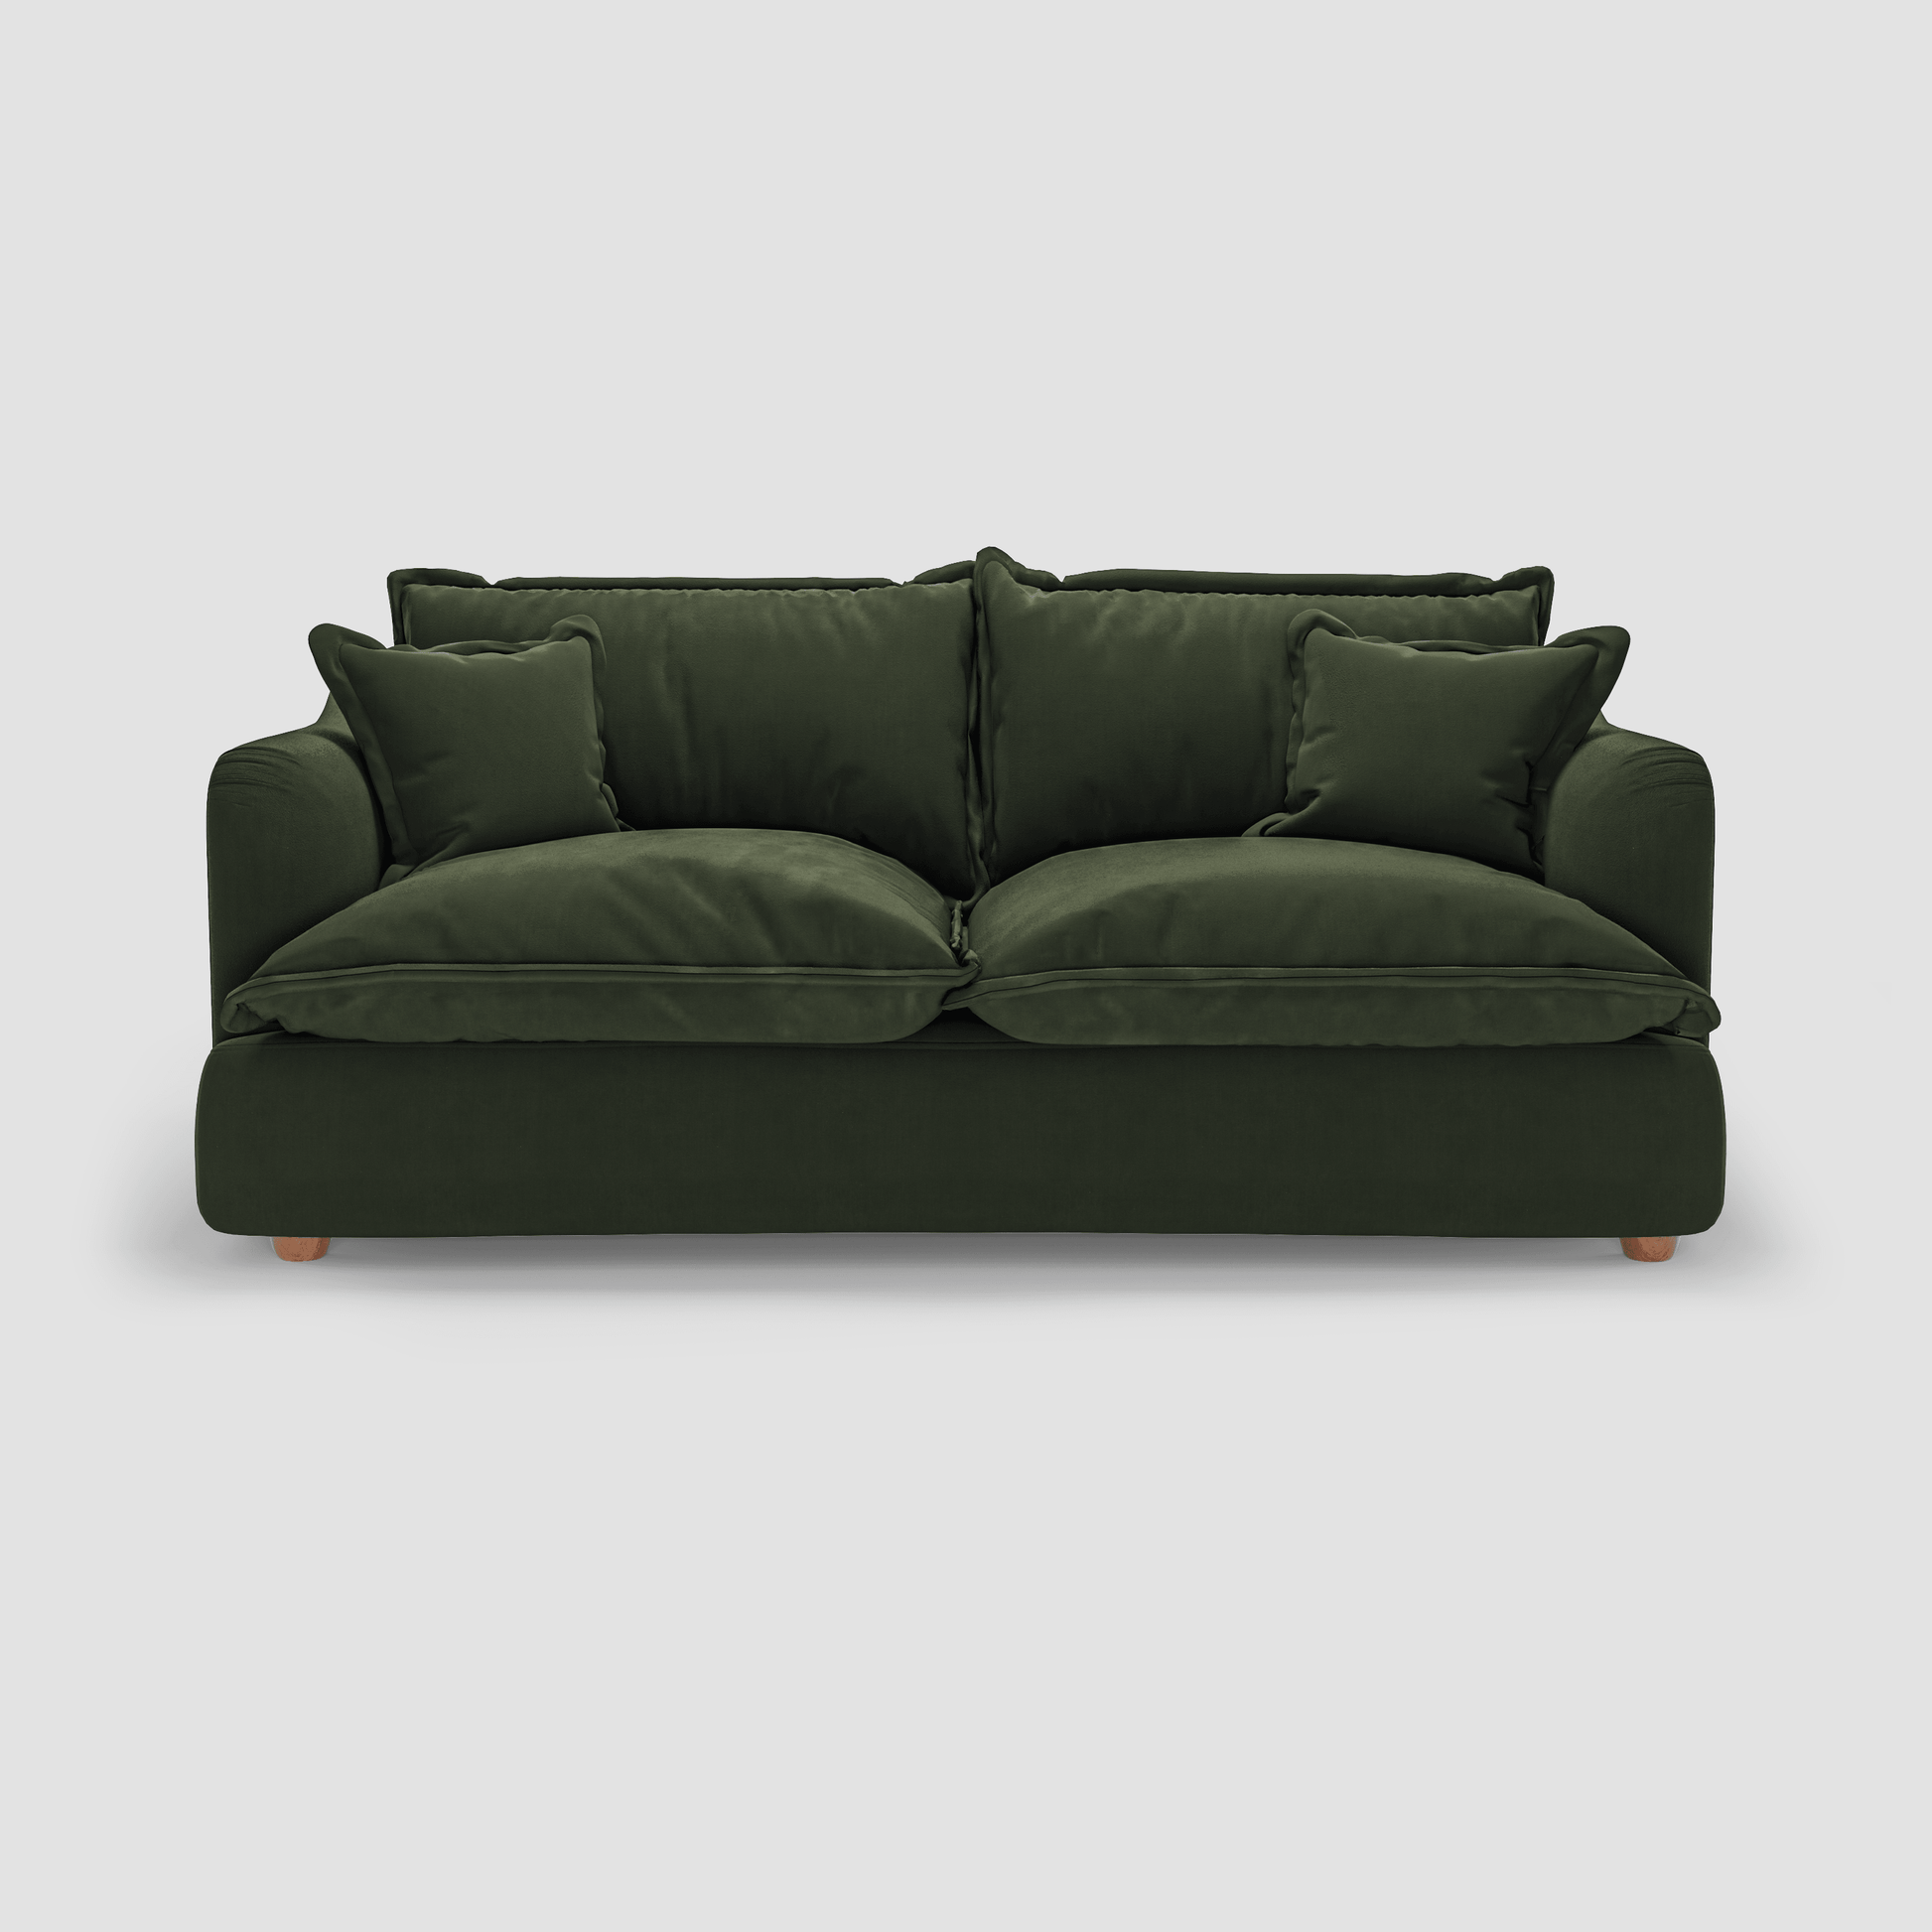 Marlie Large Two Seater Sofa - Flown the Coop